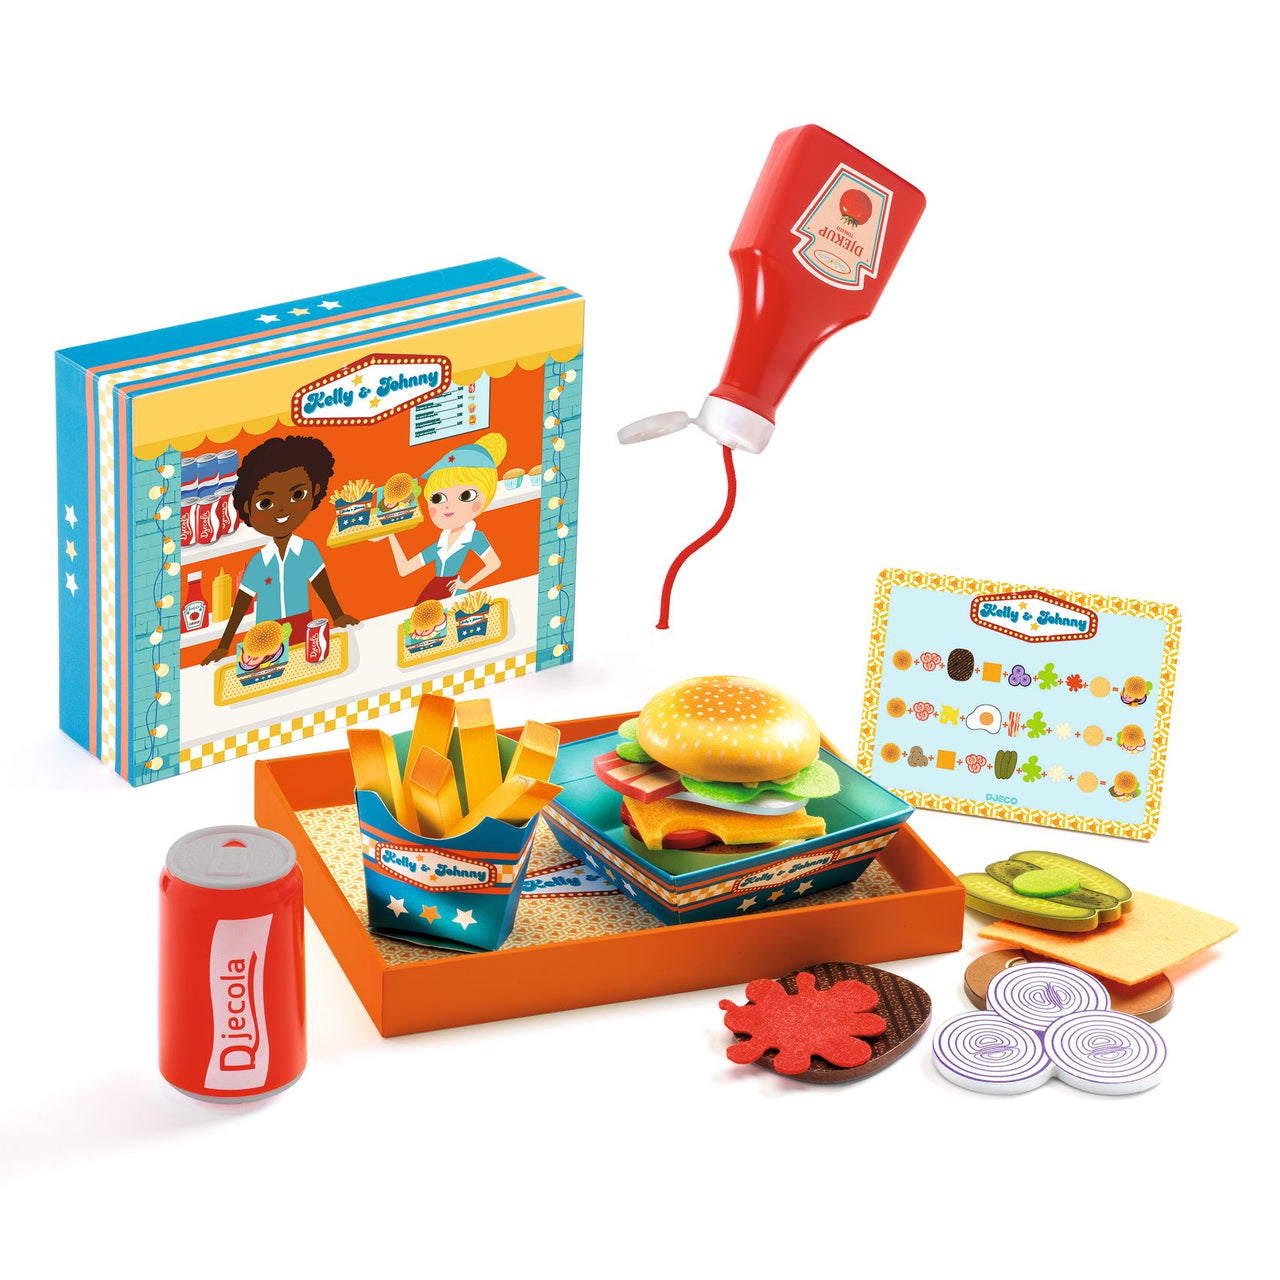 In this pretty wooden box, all the accessories needed to prepare three delicious hamburgers. The child composes the hamburgers as he wishes or follows the suggestions on the menu card. All that's left is to taste